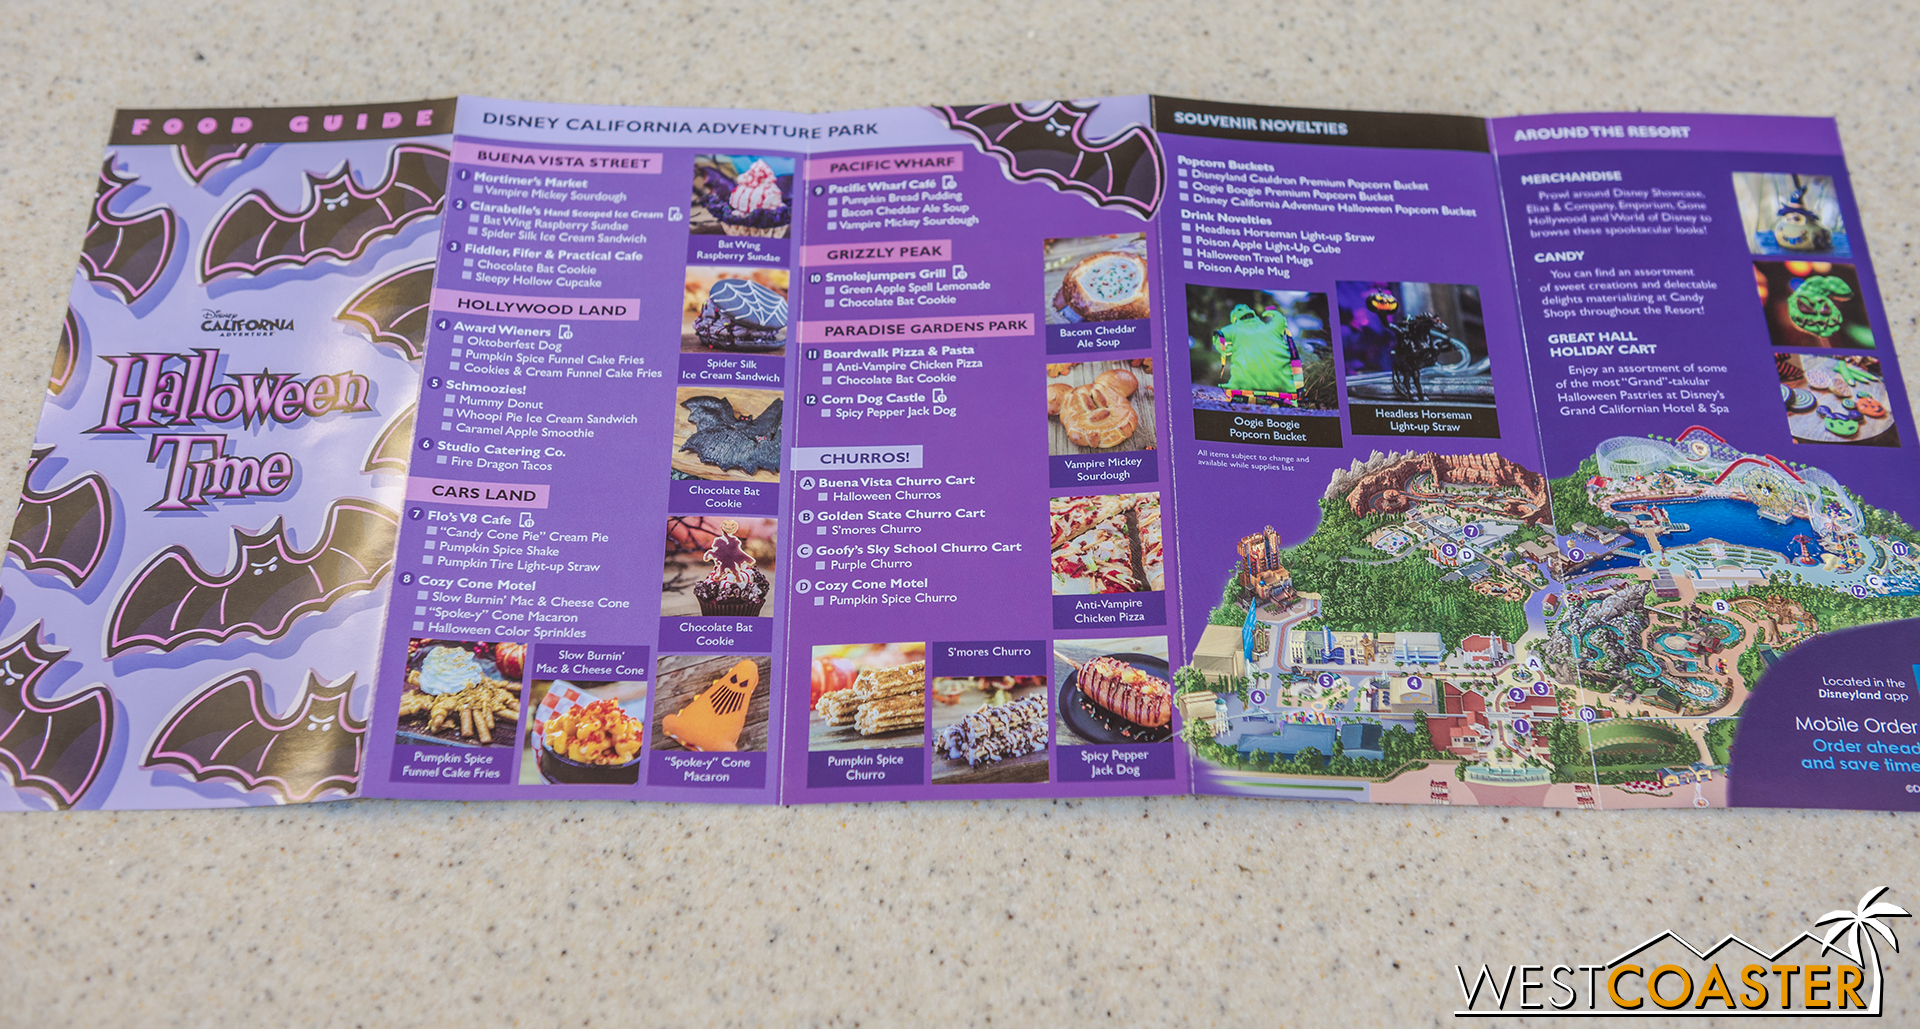  If you need a listing of what specialty food is found here, grab a food guide!  California Adventure is on one side, and Disneyland is on the back. 